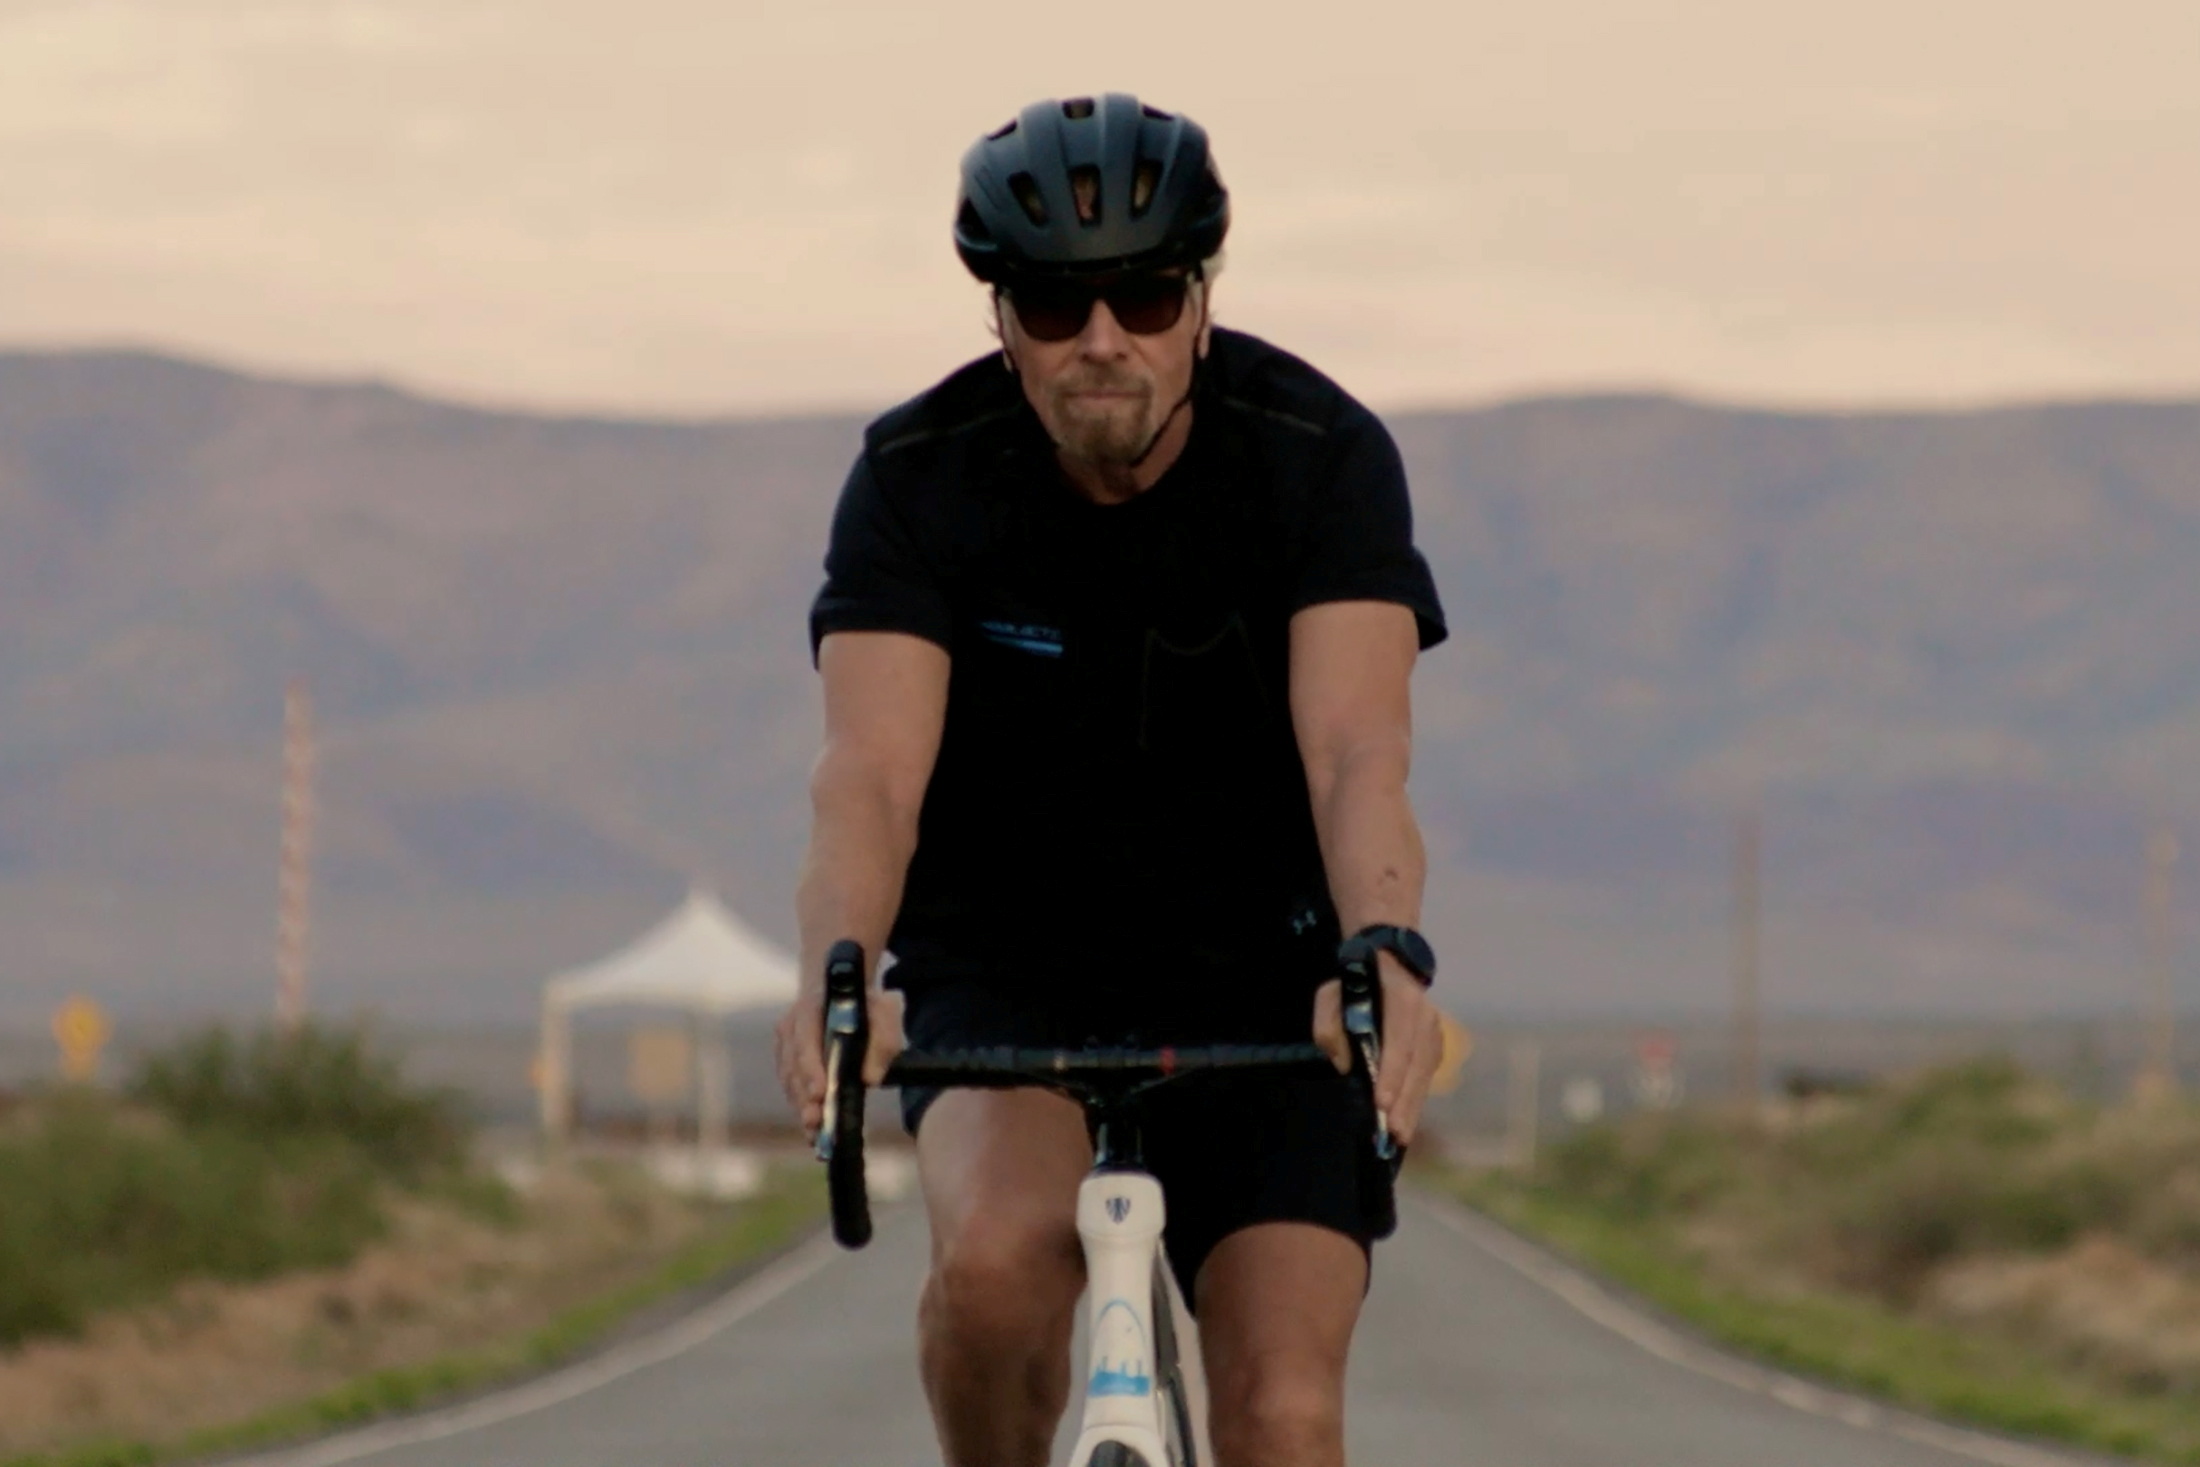 Richard Branson arrives by bicycle to Spaceport America near Truth or Consequences, New Mexico, U.S. July 5, 2021, in a still image from a video. Video taken July 5, 2021.    Virgin Galactic/Handout via REUTERS